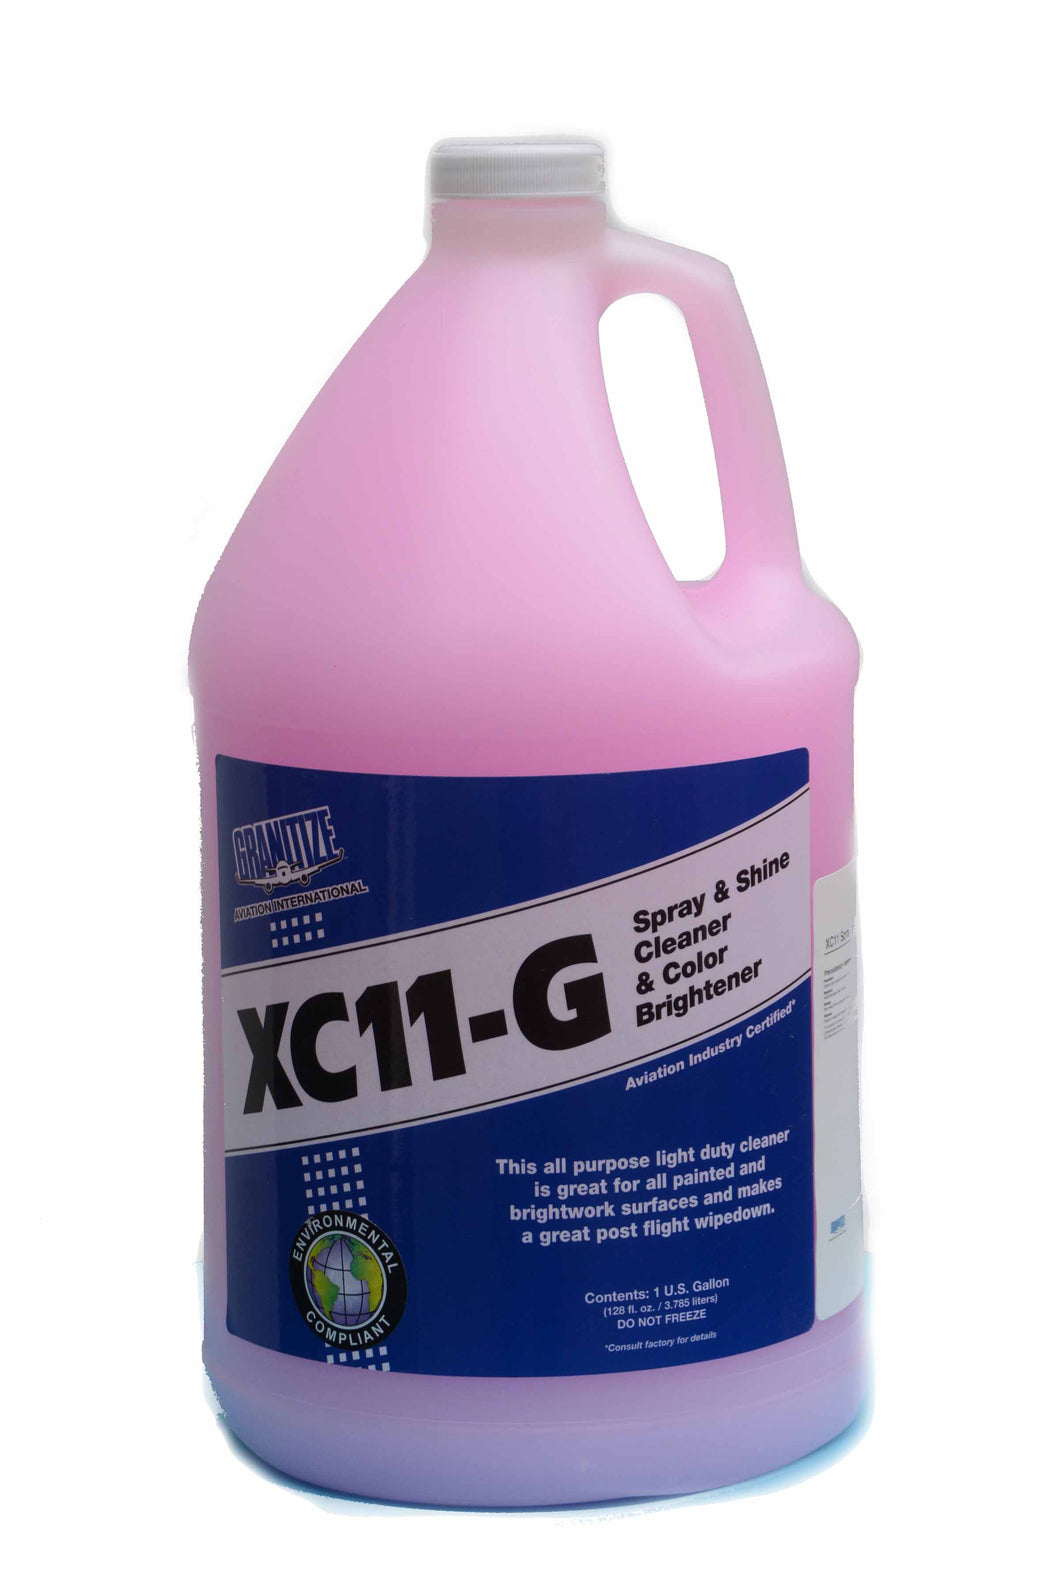 GRANITIZE XC11 Spray & Shine Cleaner and Color Brightener